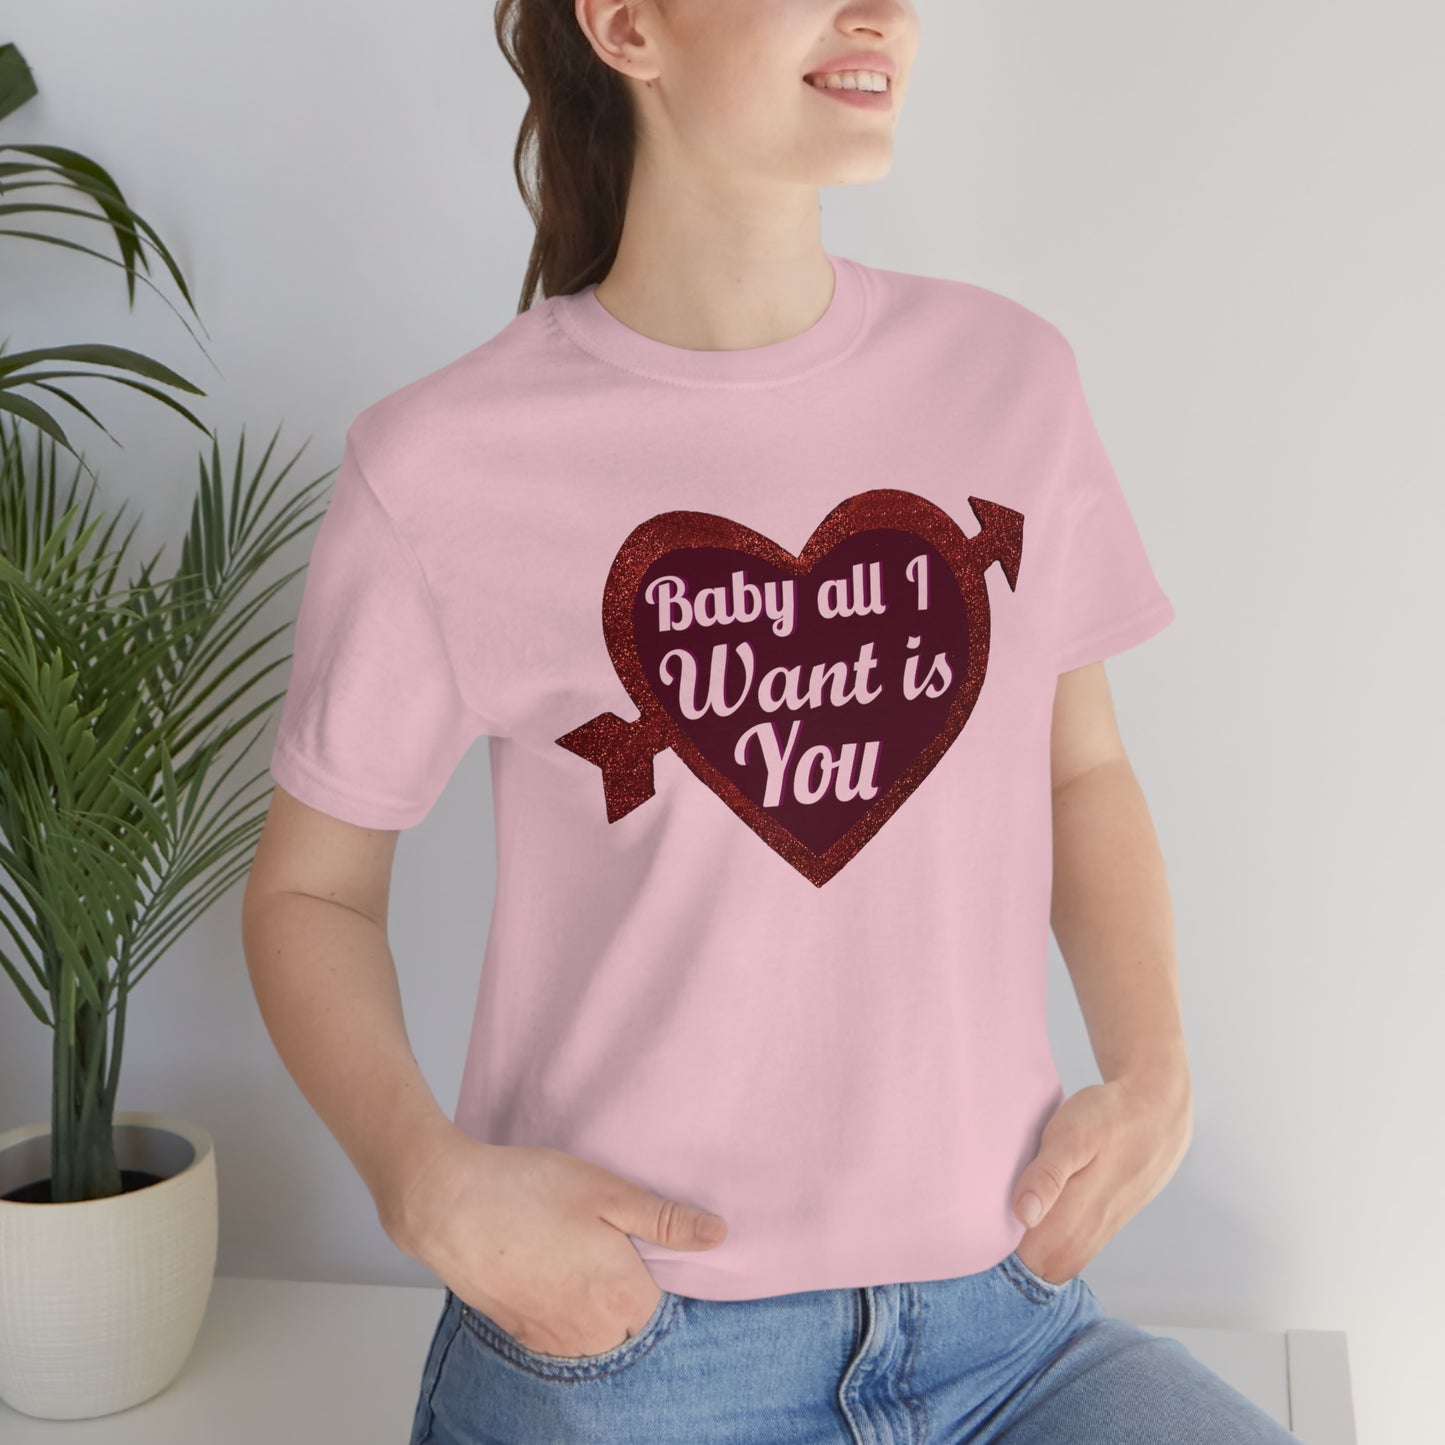 Baby all I want is You Tee